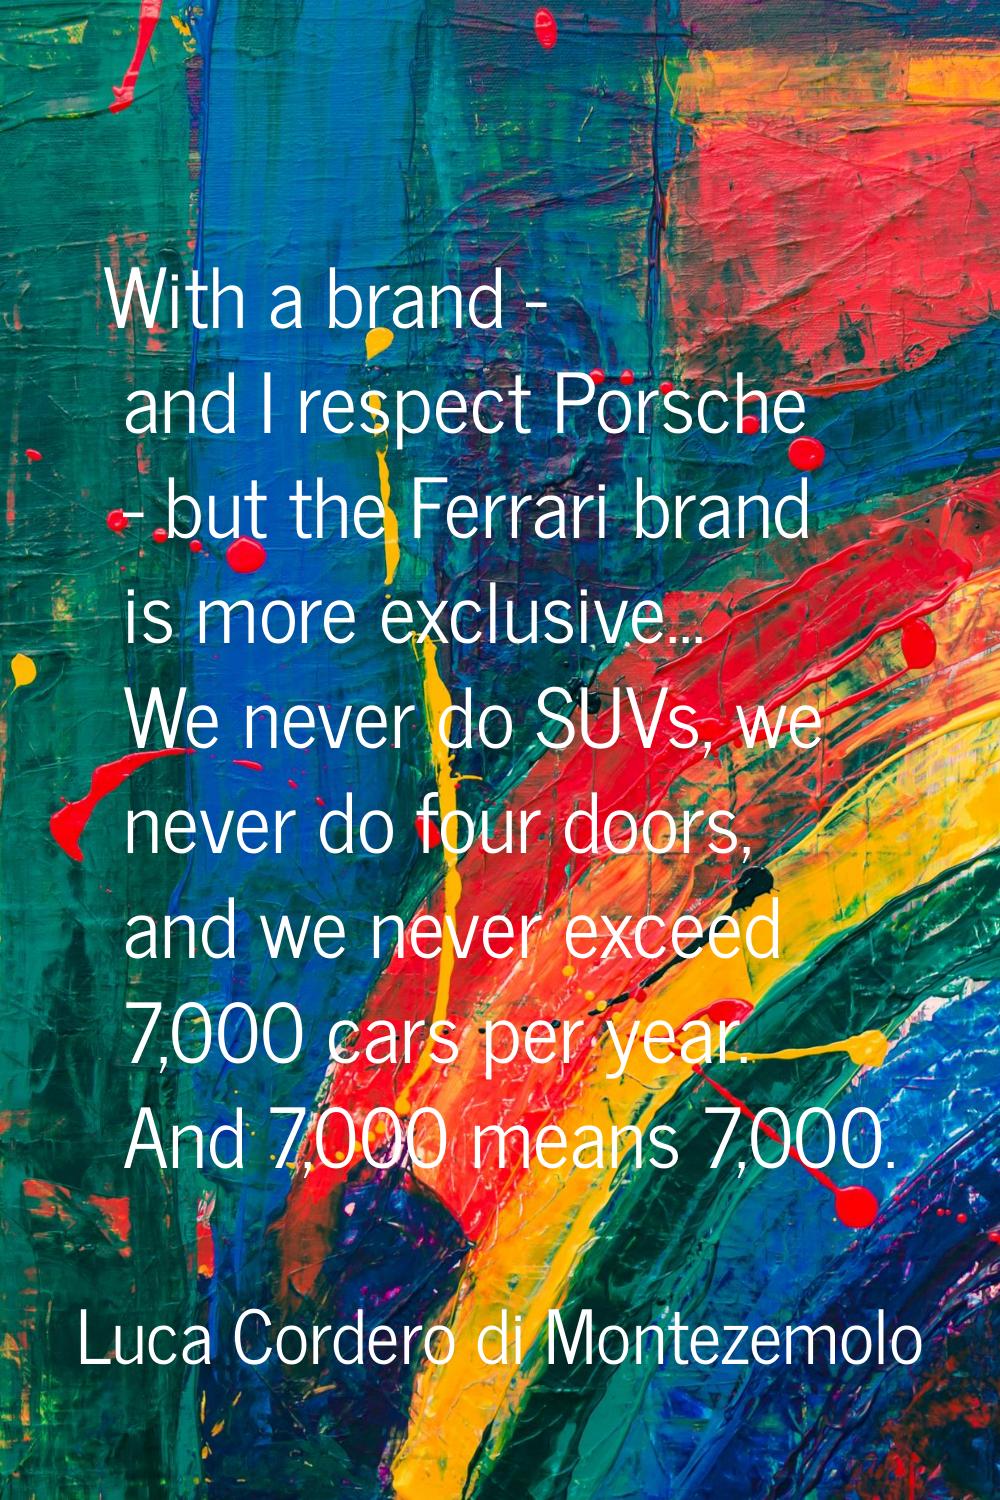 With a brand - and I respect Porsche - but the Ferrari brand is more exclusive... We never do SUVs,